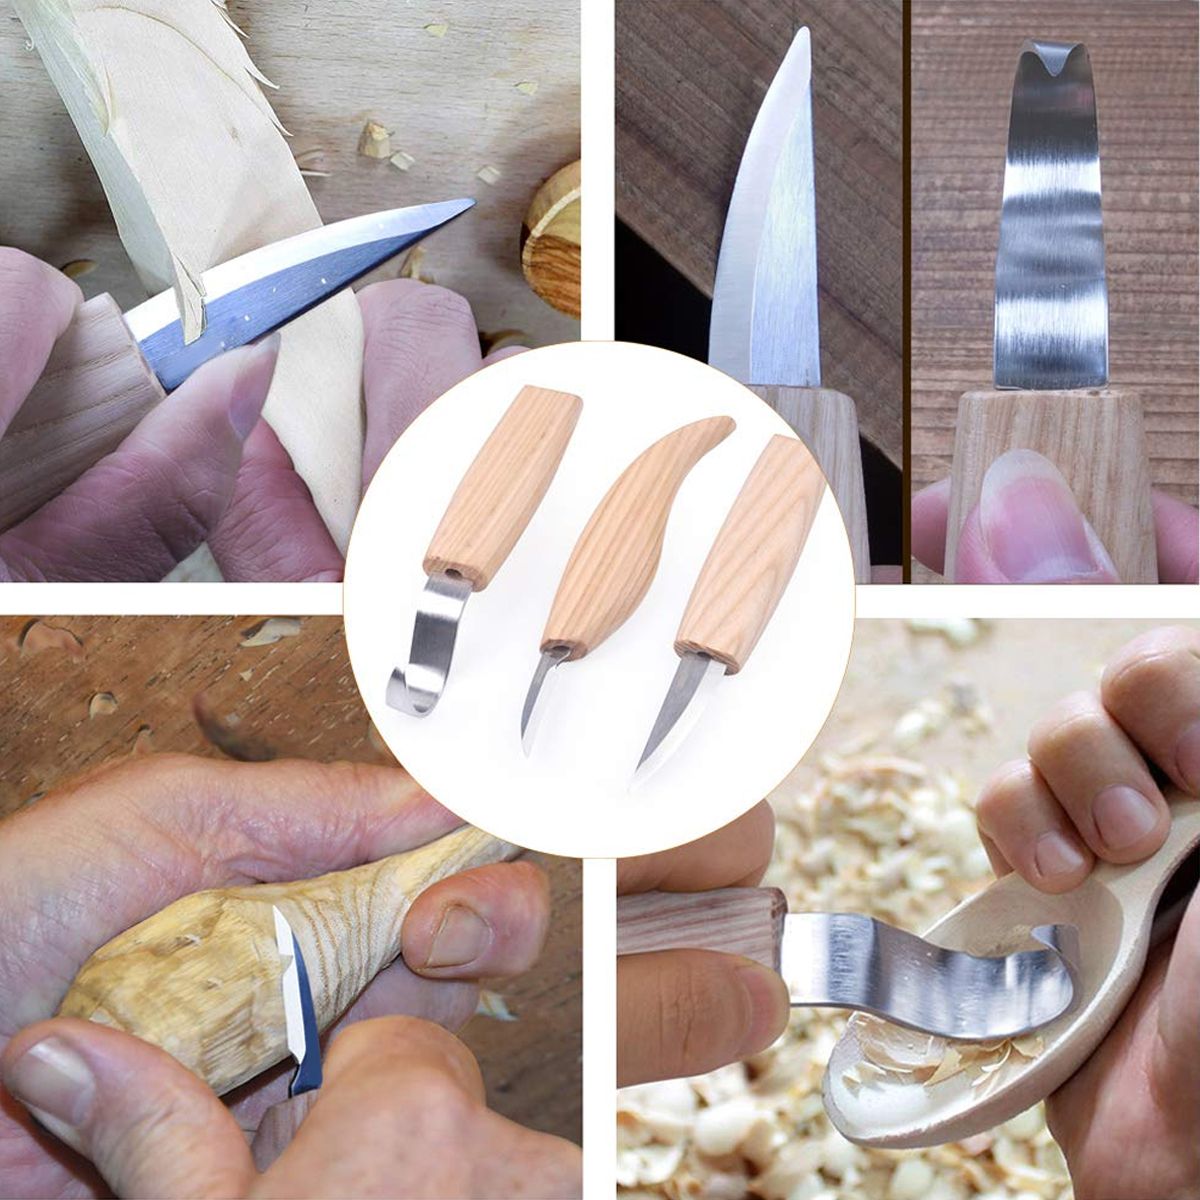 Woodcarving-Cutter-Woodwork-Carving-Knive-TOP-SET-Sculptural-DIY-Spoon-Carving-Knive-Tool-Whittling--1664628